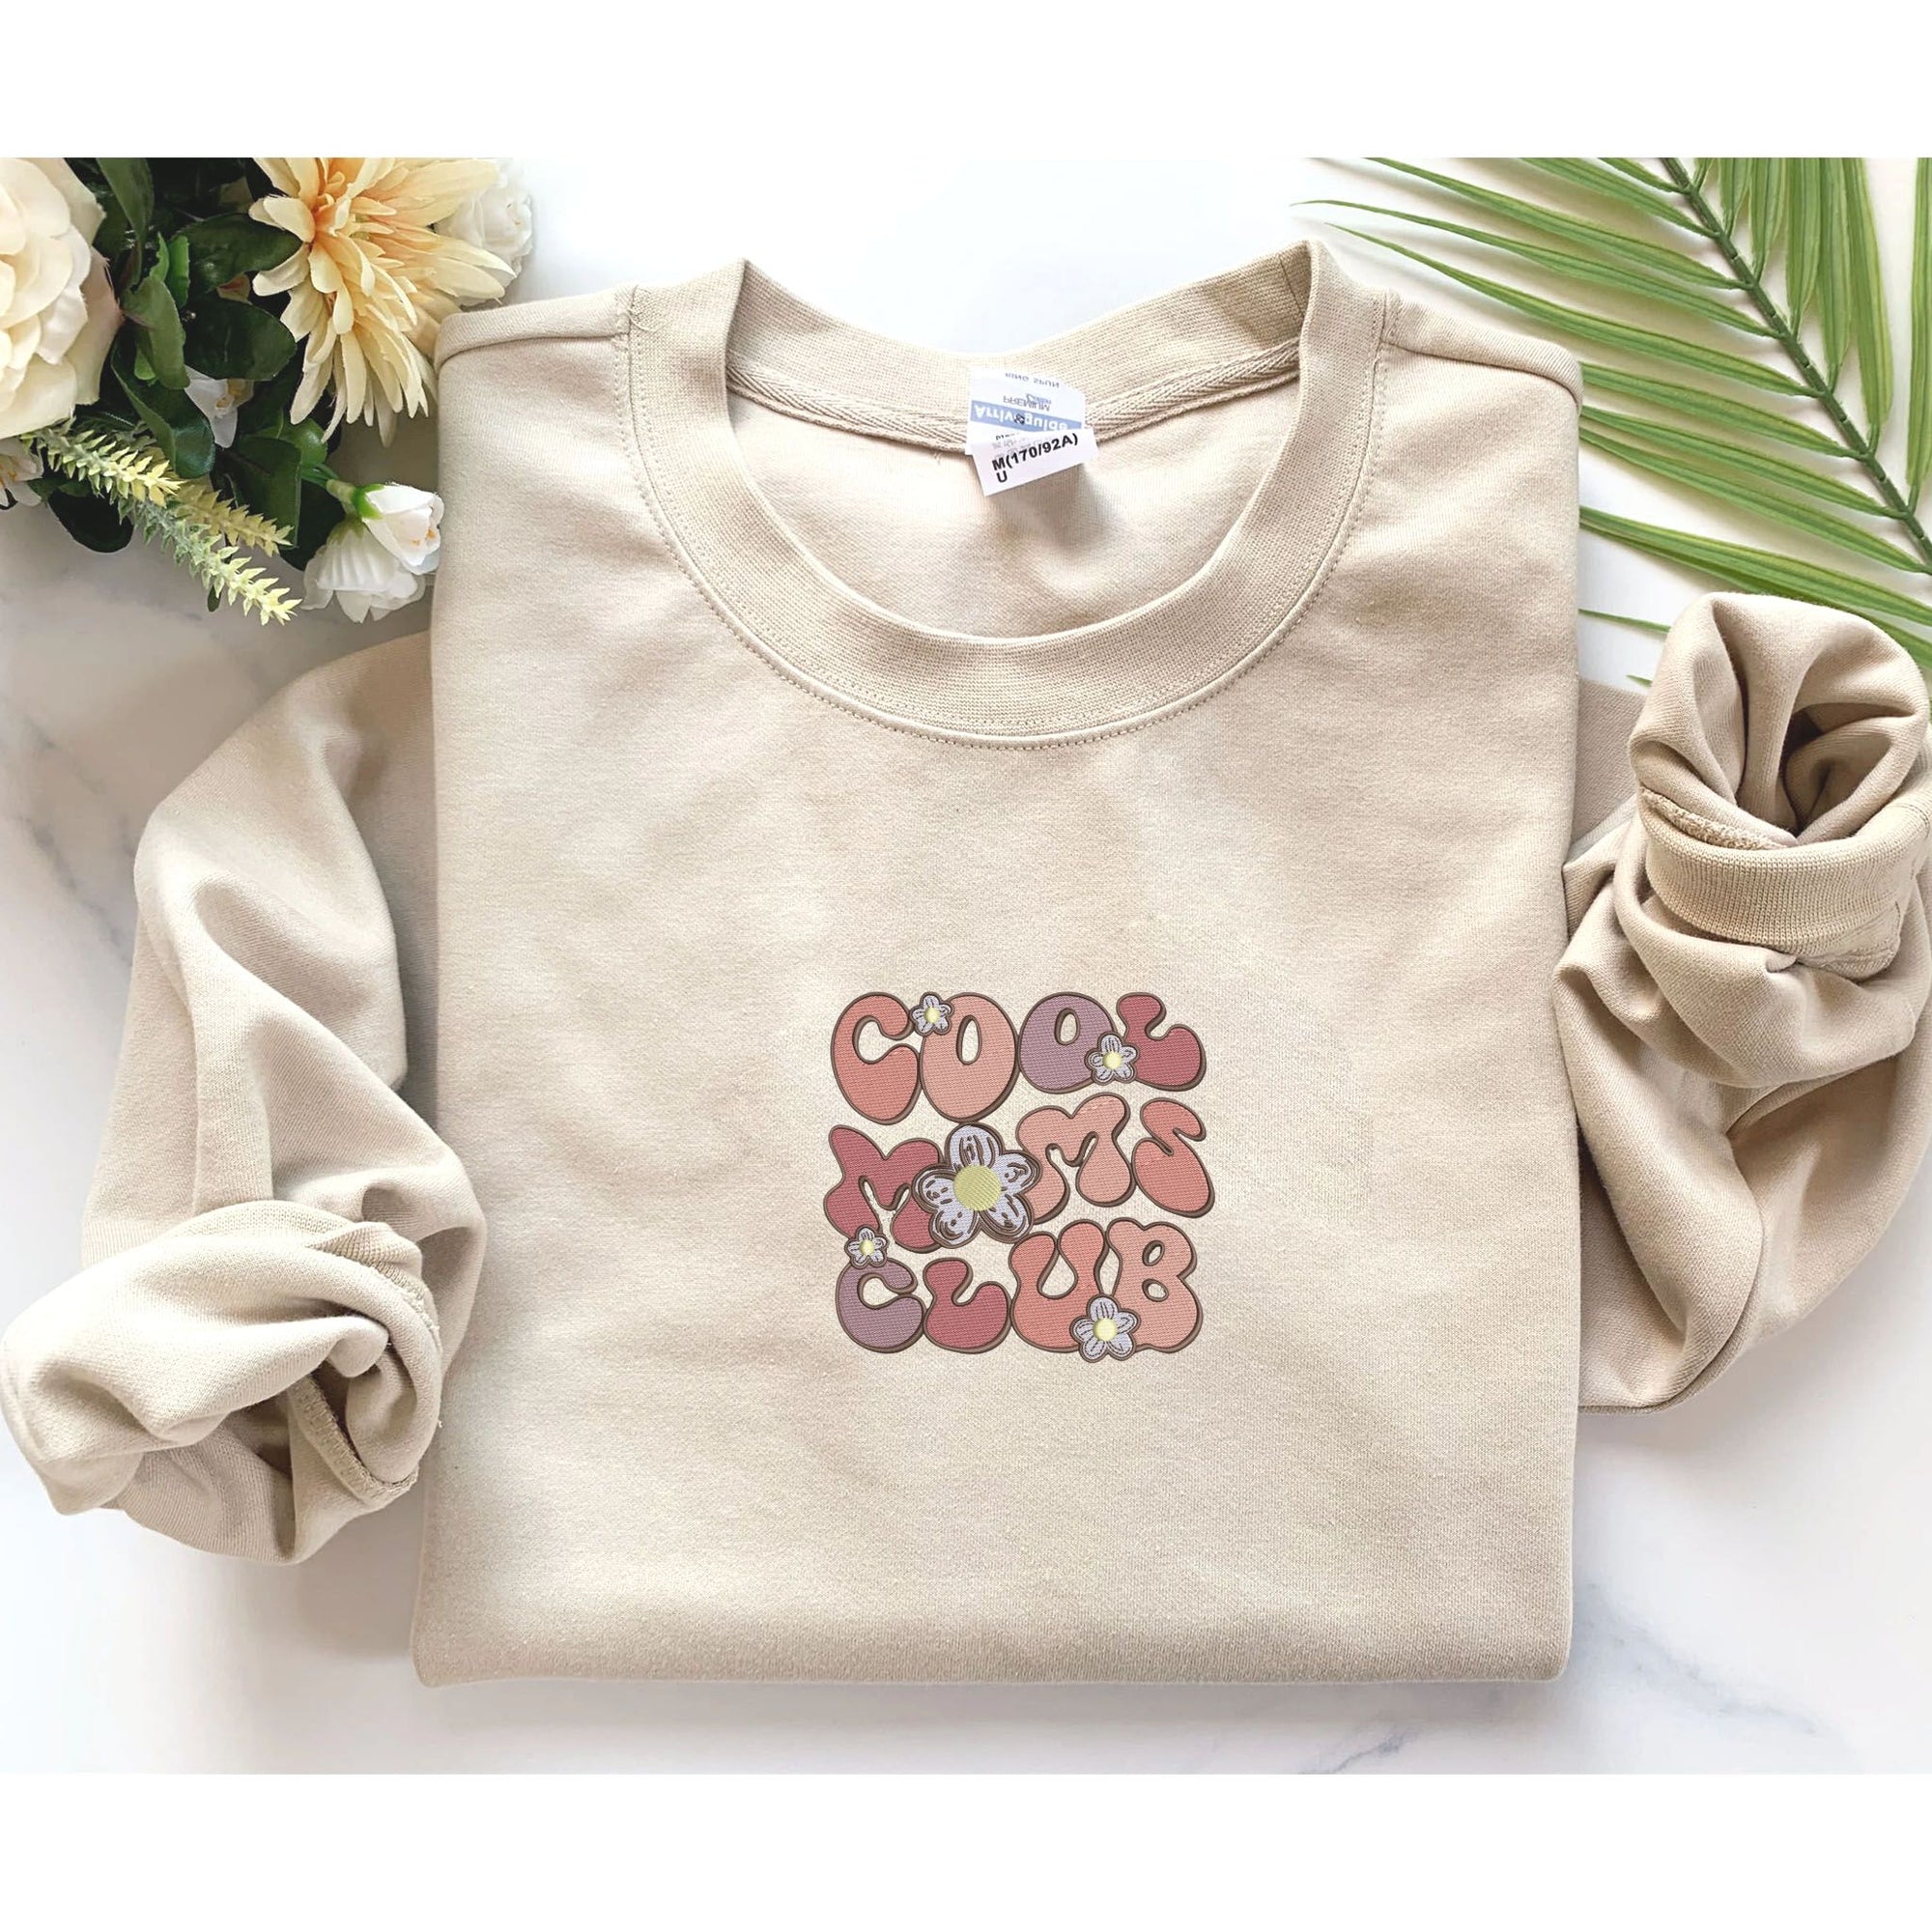 Custom Embroidered Cool Mom Club Sweatshirt, Personalized Crewneck With Initial On Sleeve